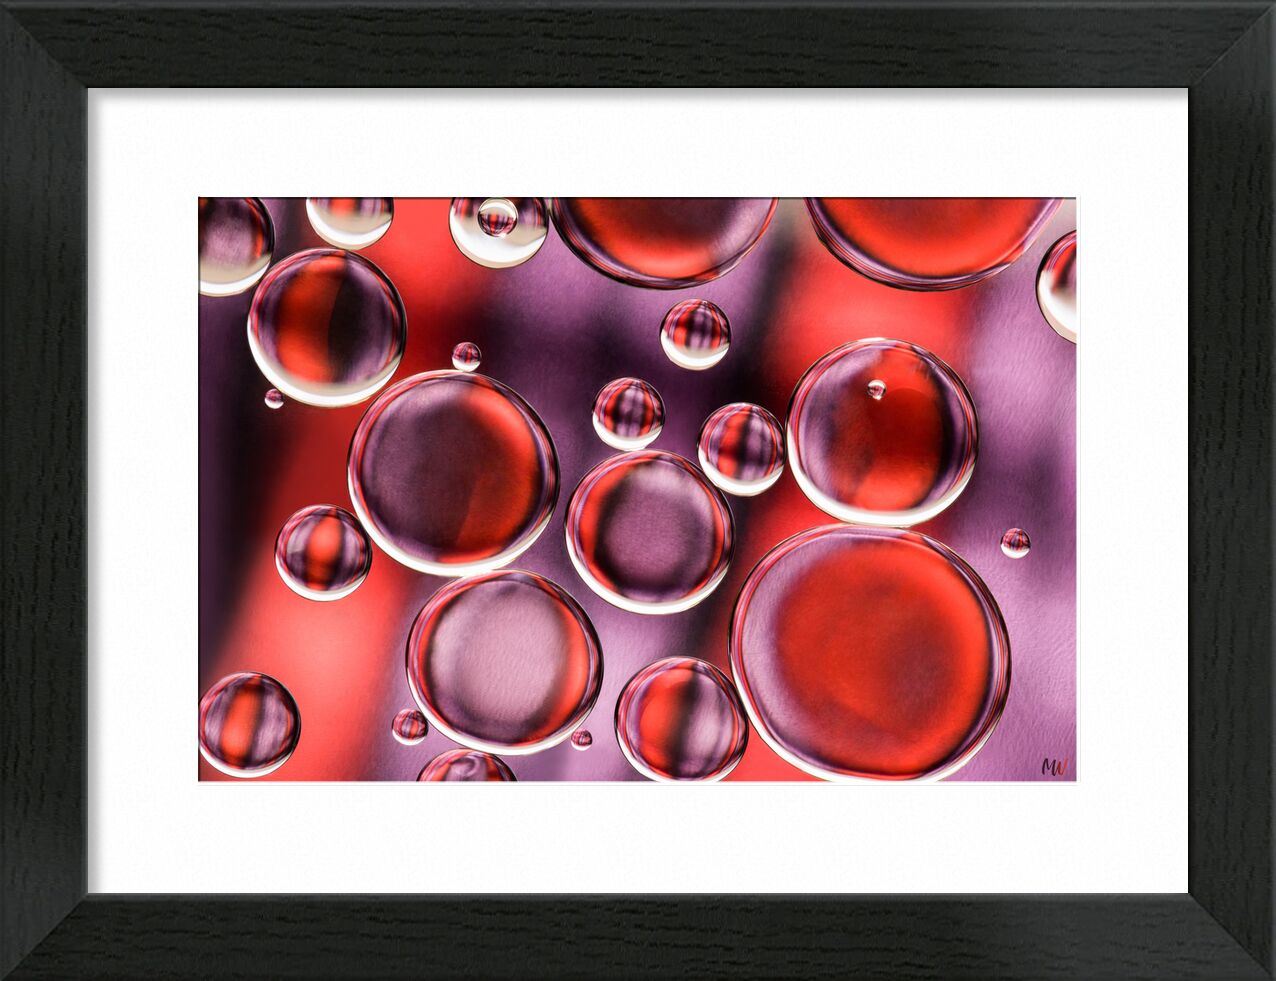 Oily bubbles #9 from Mickaël Weber, Prodi Art, orange, purple, abstract, macro, color, droplets, huile, oil, oily, fun, formes, shapes, water, modern, Bulles, bubbles, drops, goutelettes